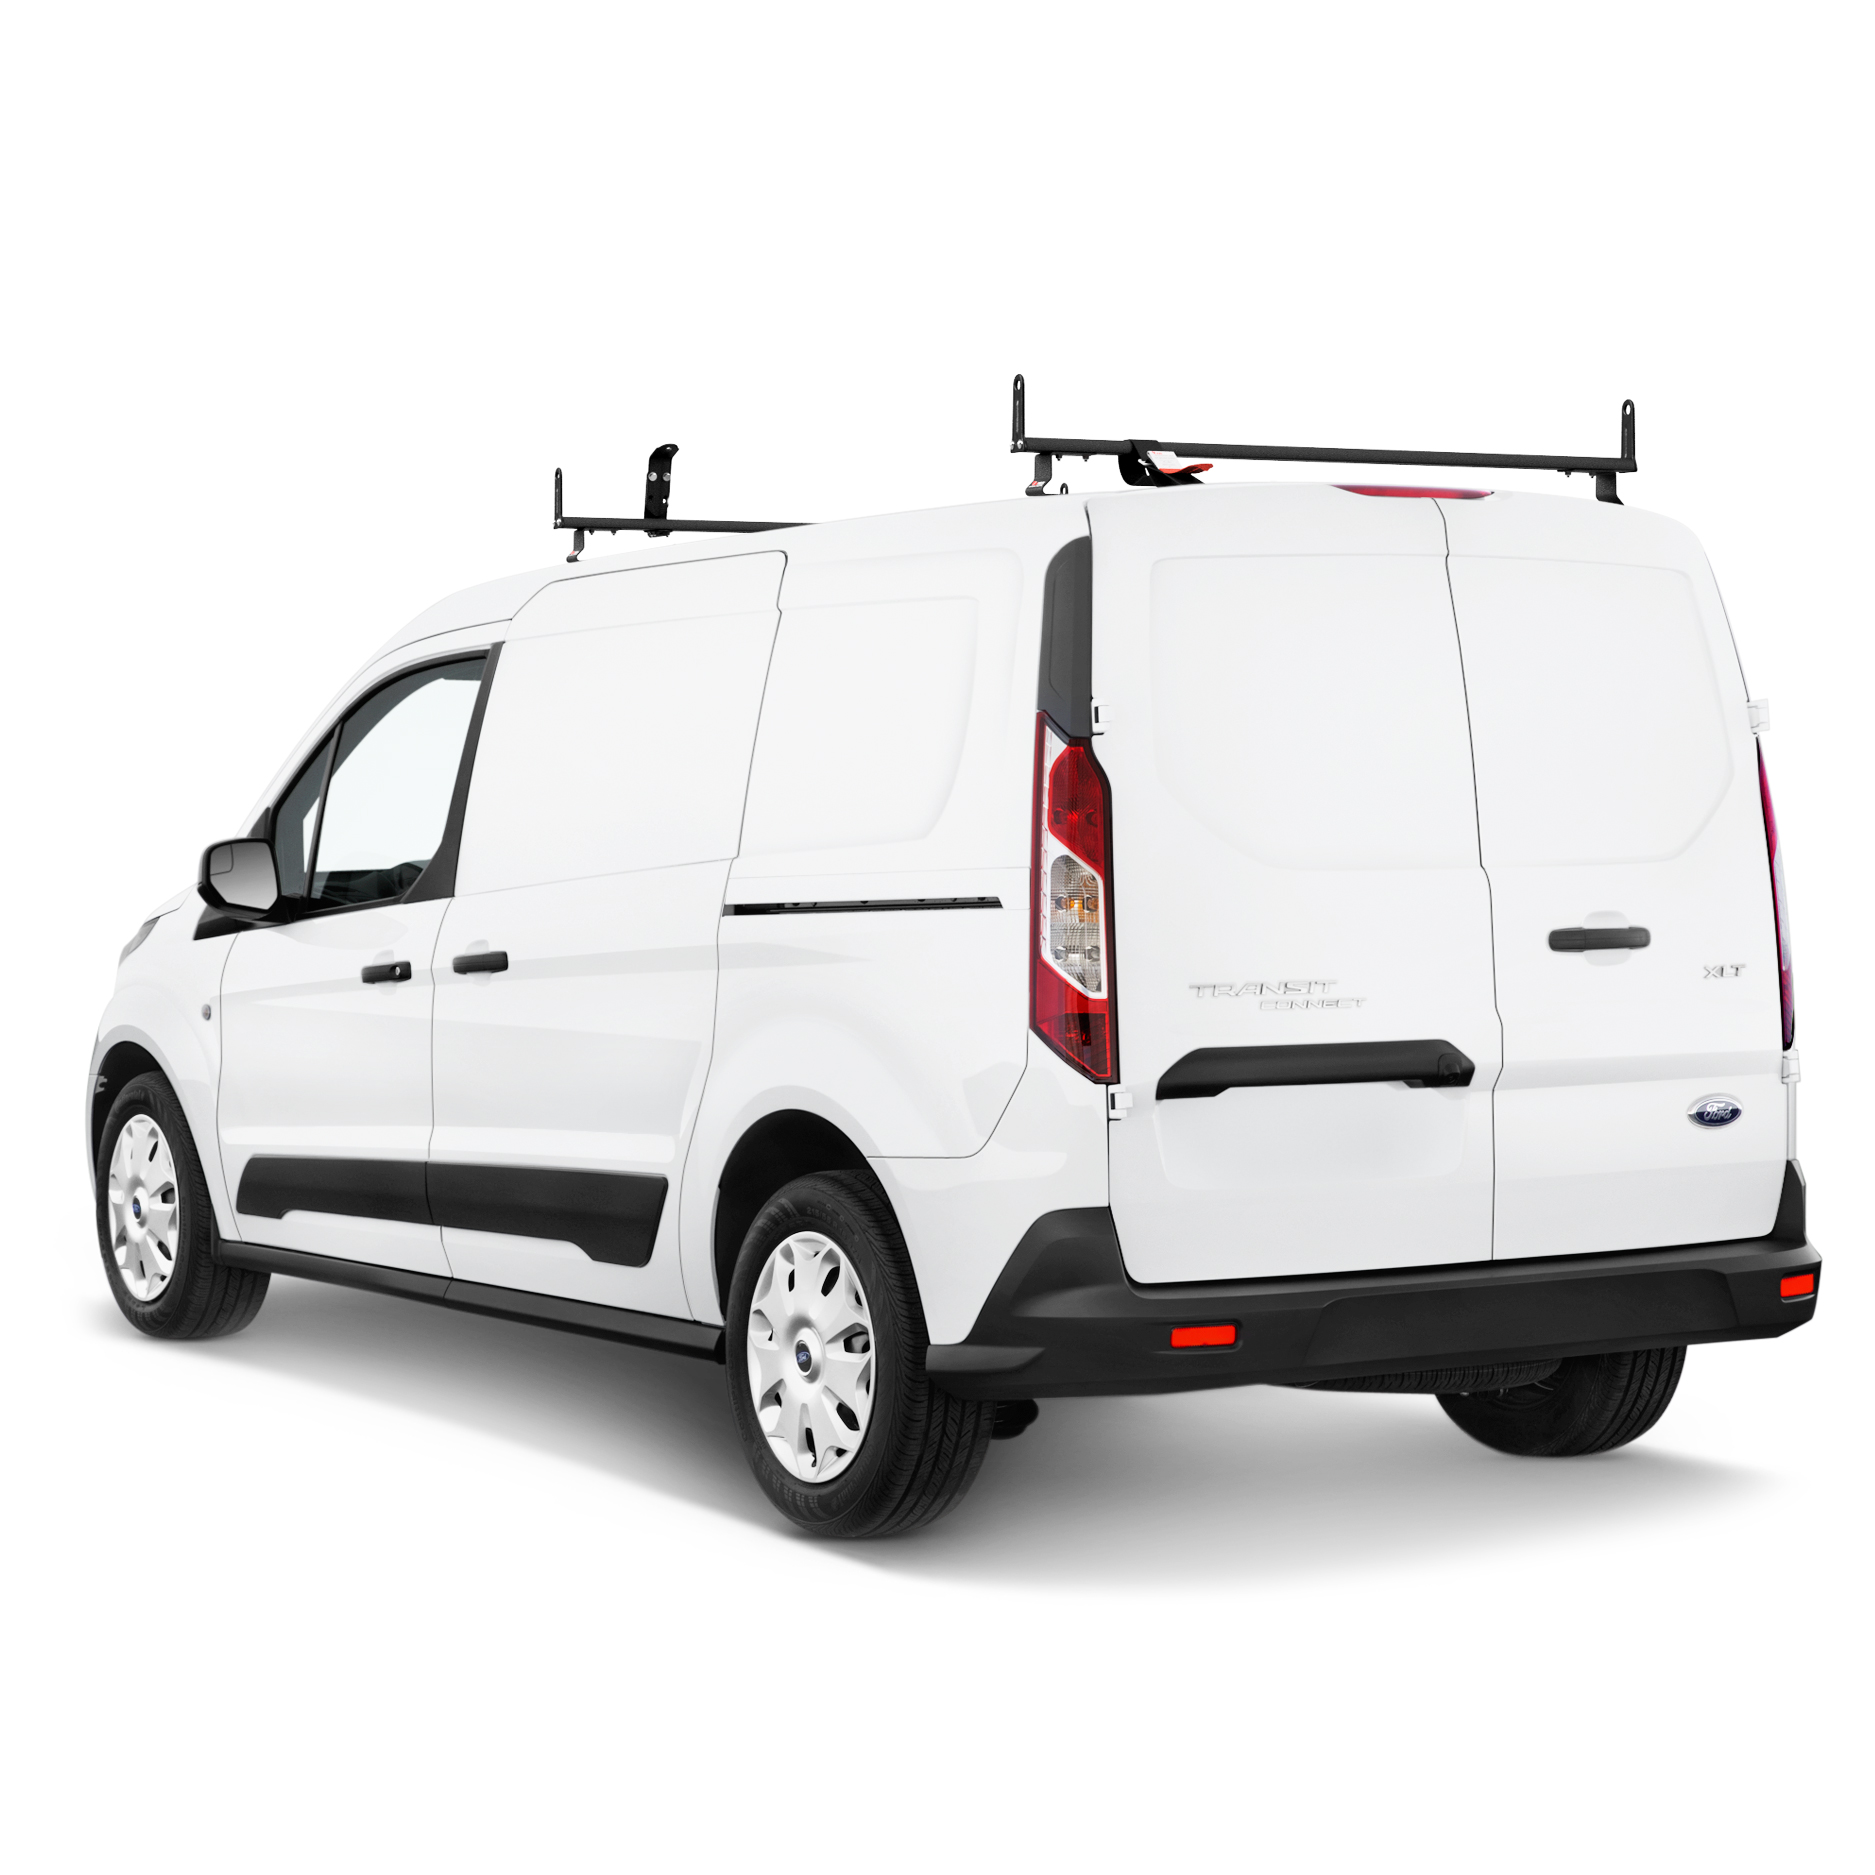 J2000 Aluminum Ladder Roof Rack 2 bar System with Accessories for a 2014-Newer Transit Connect Black 